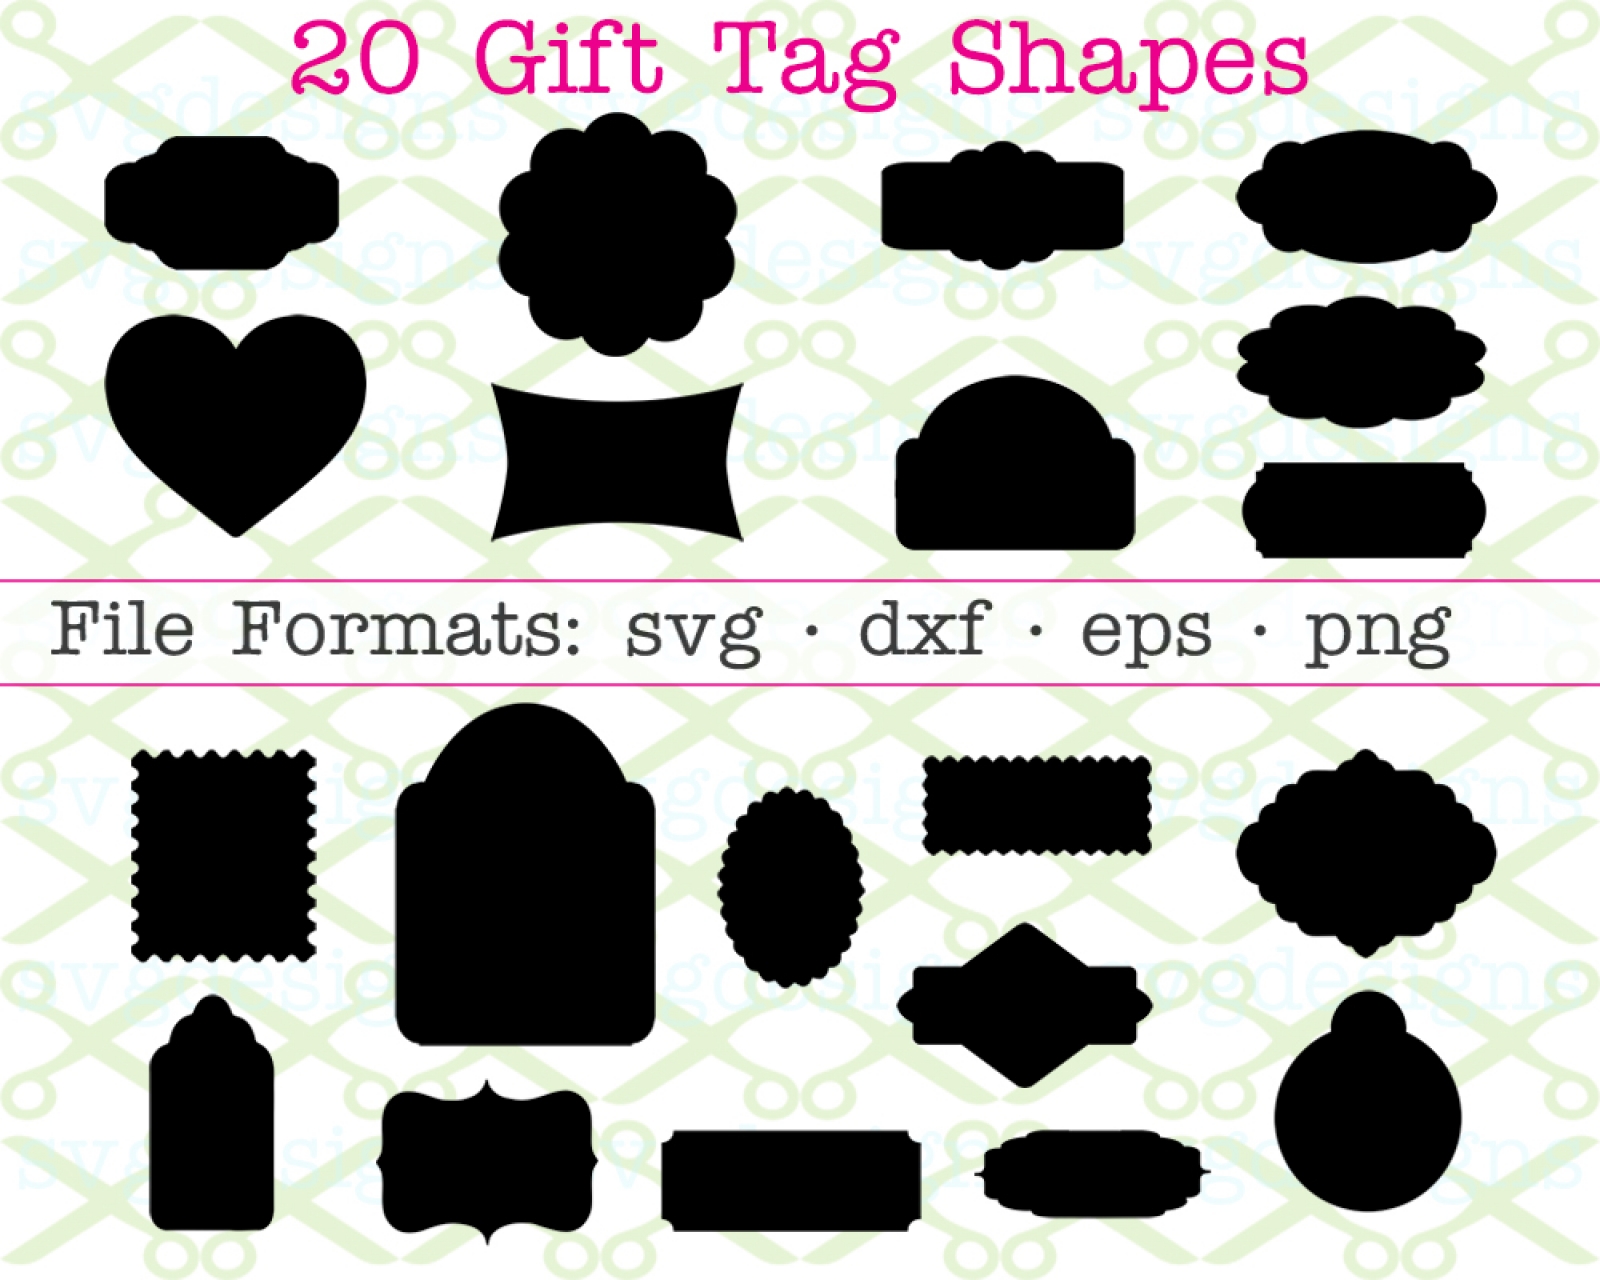 Christmas Gift Tags - SVG EPS PNG DXF Cut Files for Cricut and